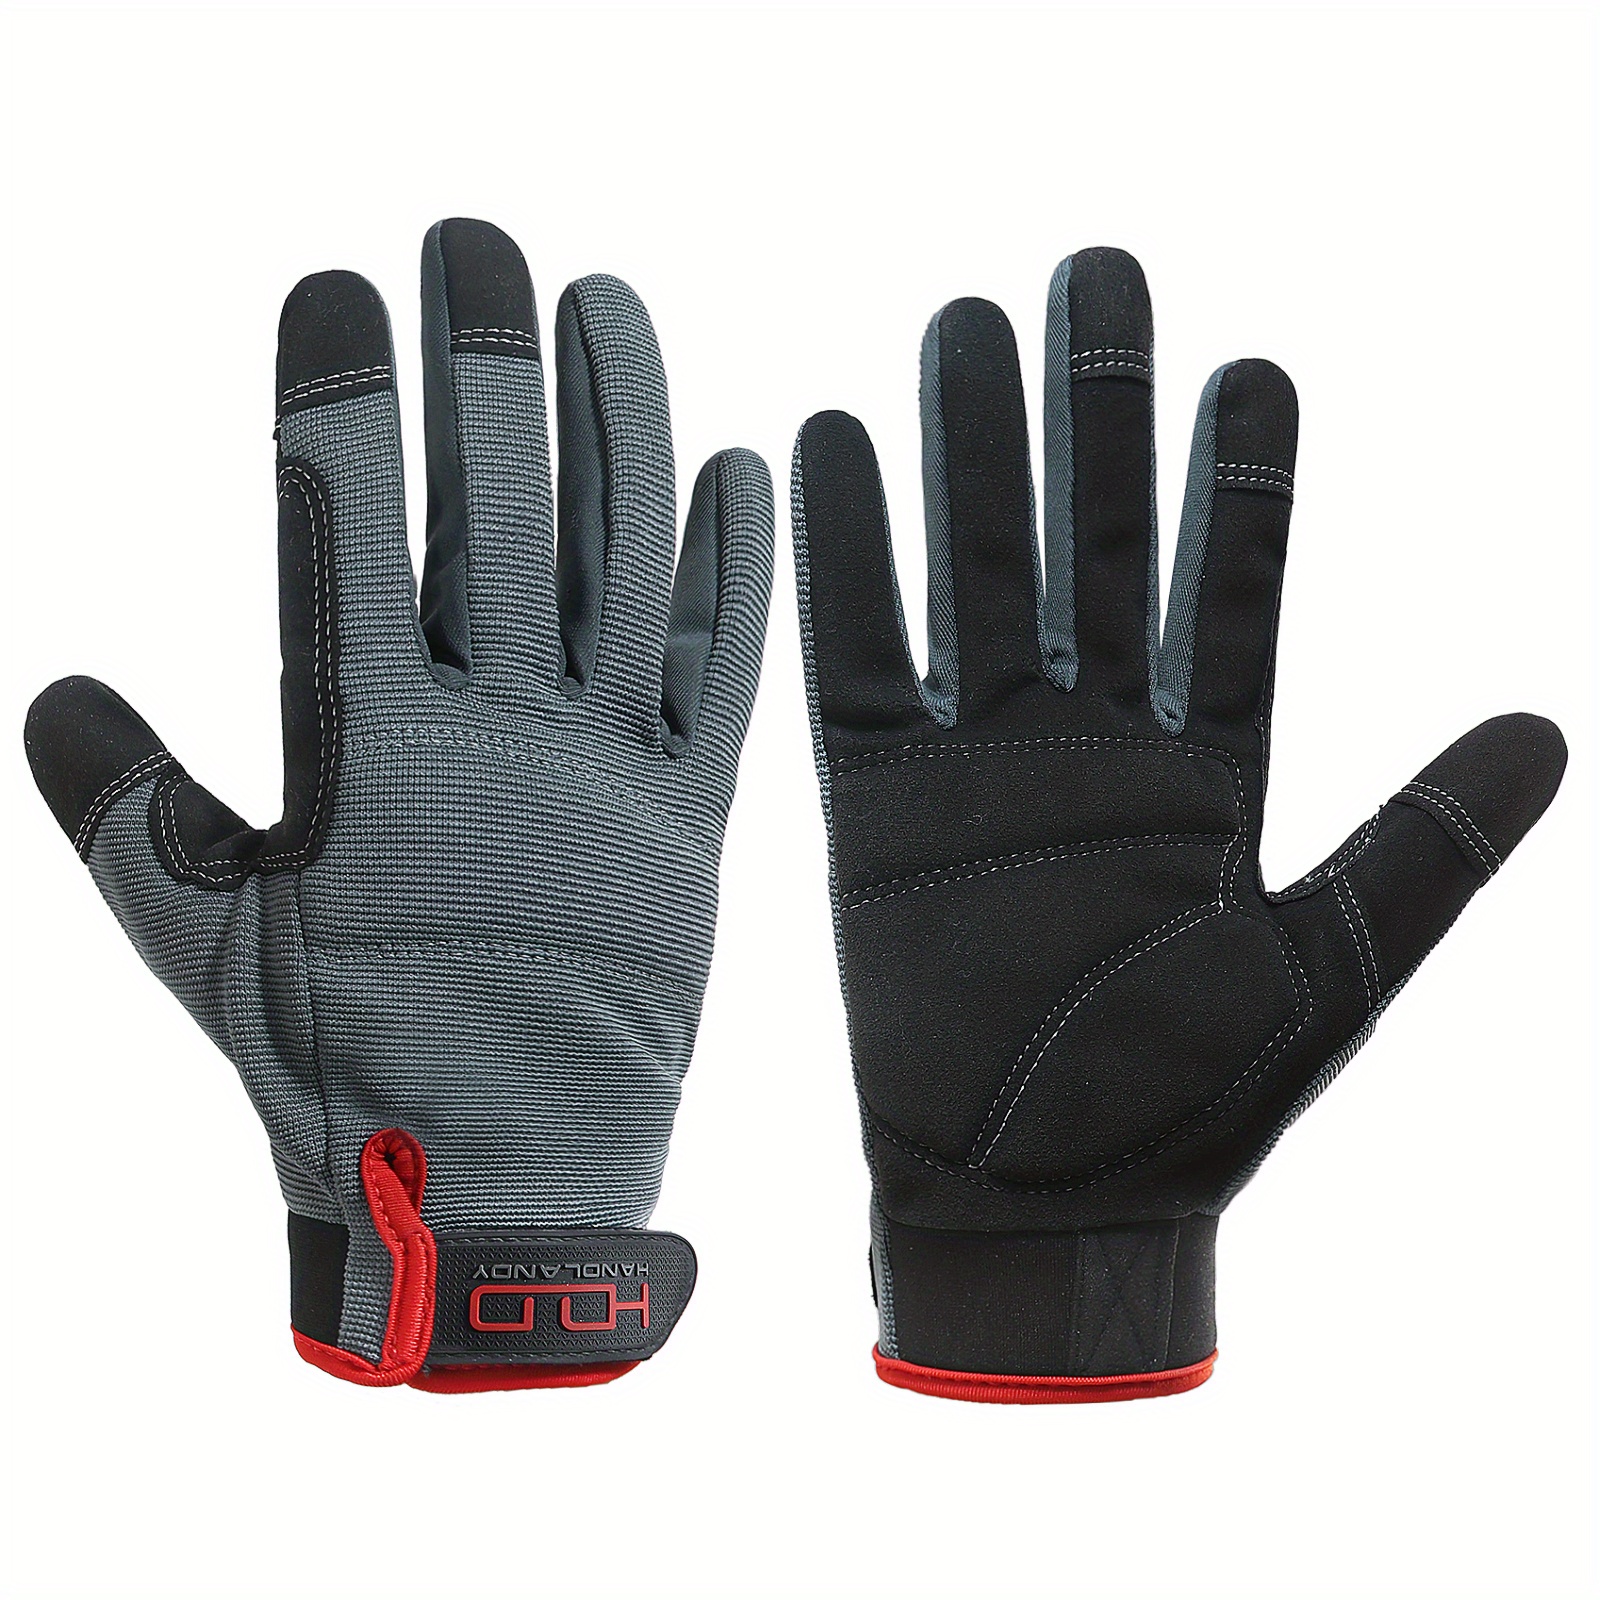 Heavy-Duty Synthetic Leather Work Gloves Impact Protection Mechanic Gloves  Touchscreen Vibration Reduction Safety Gloves Men